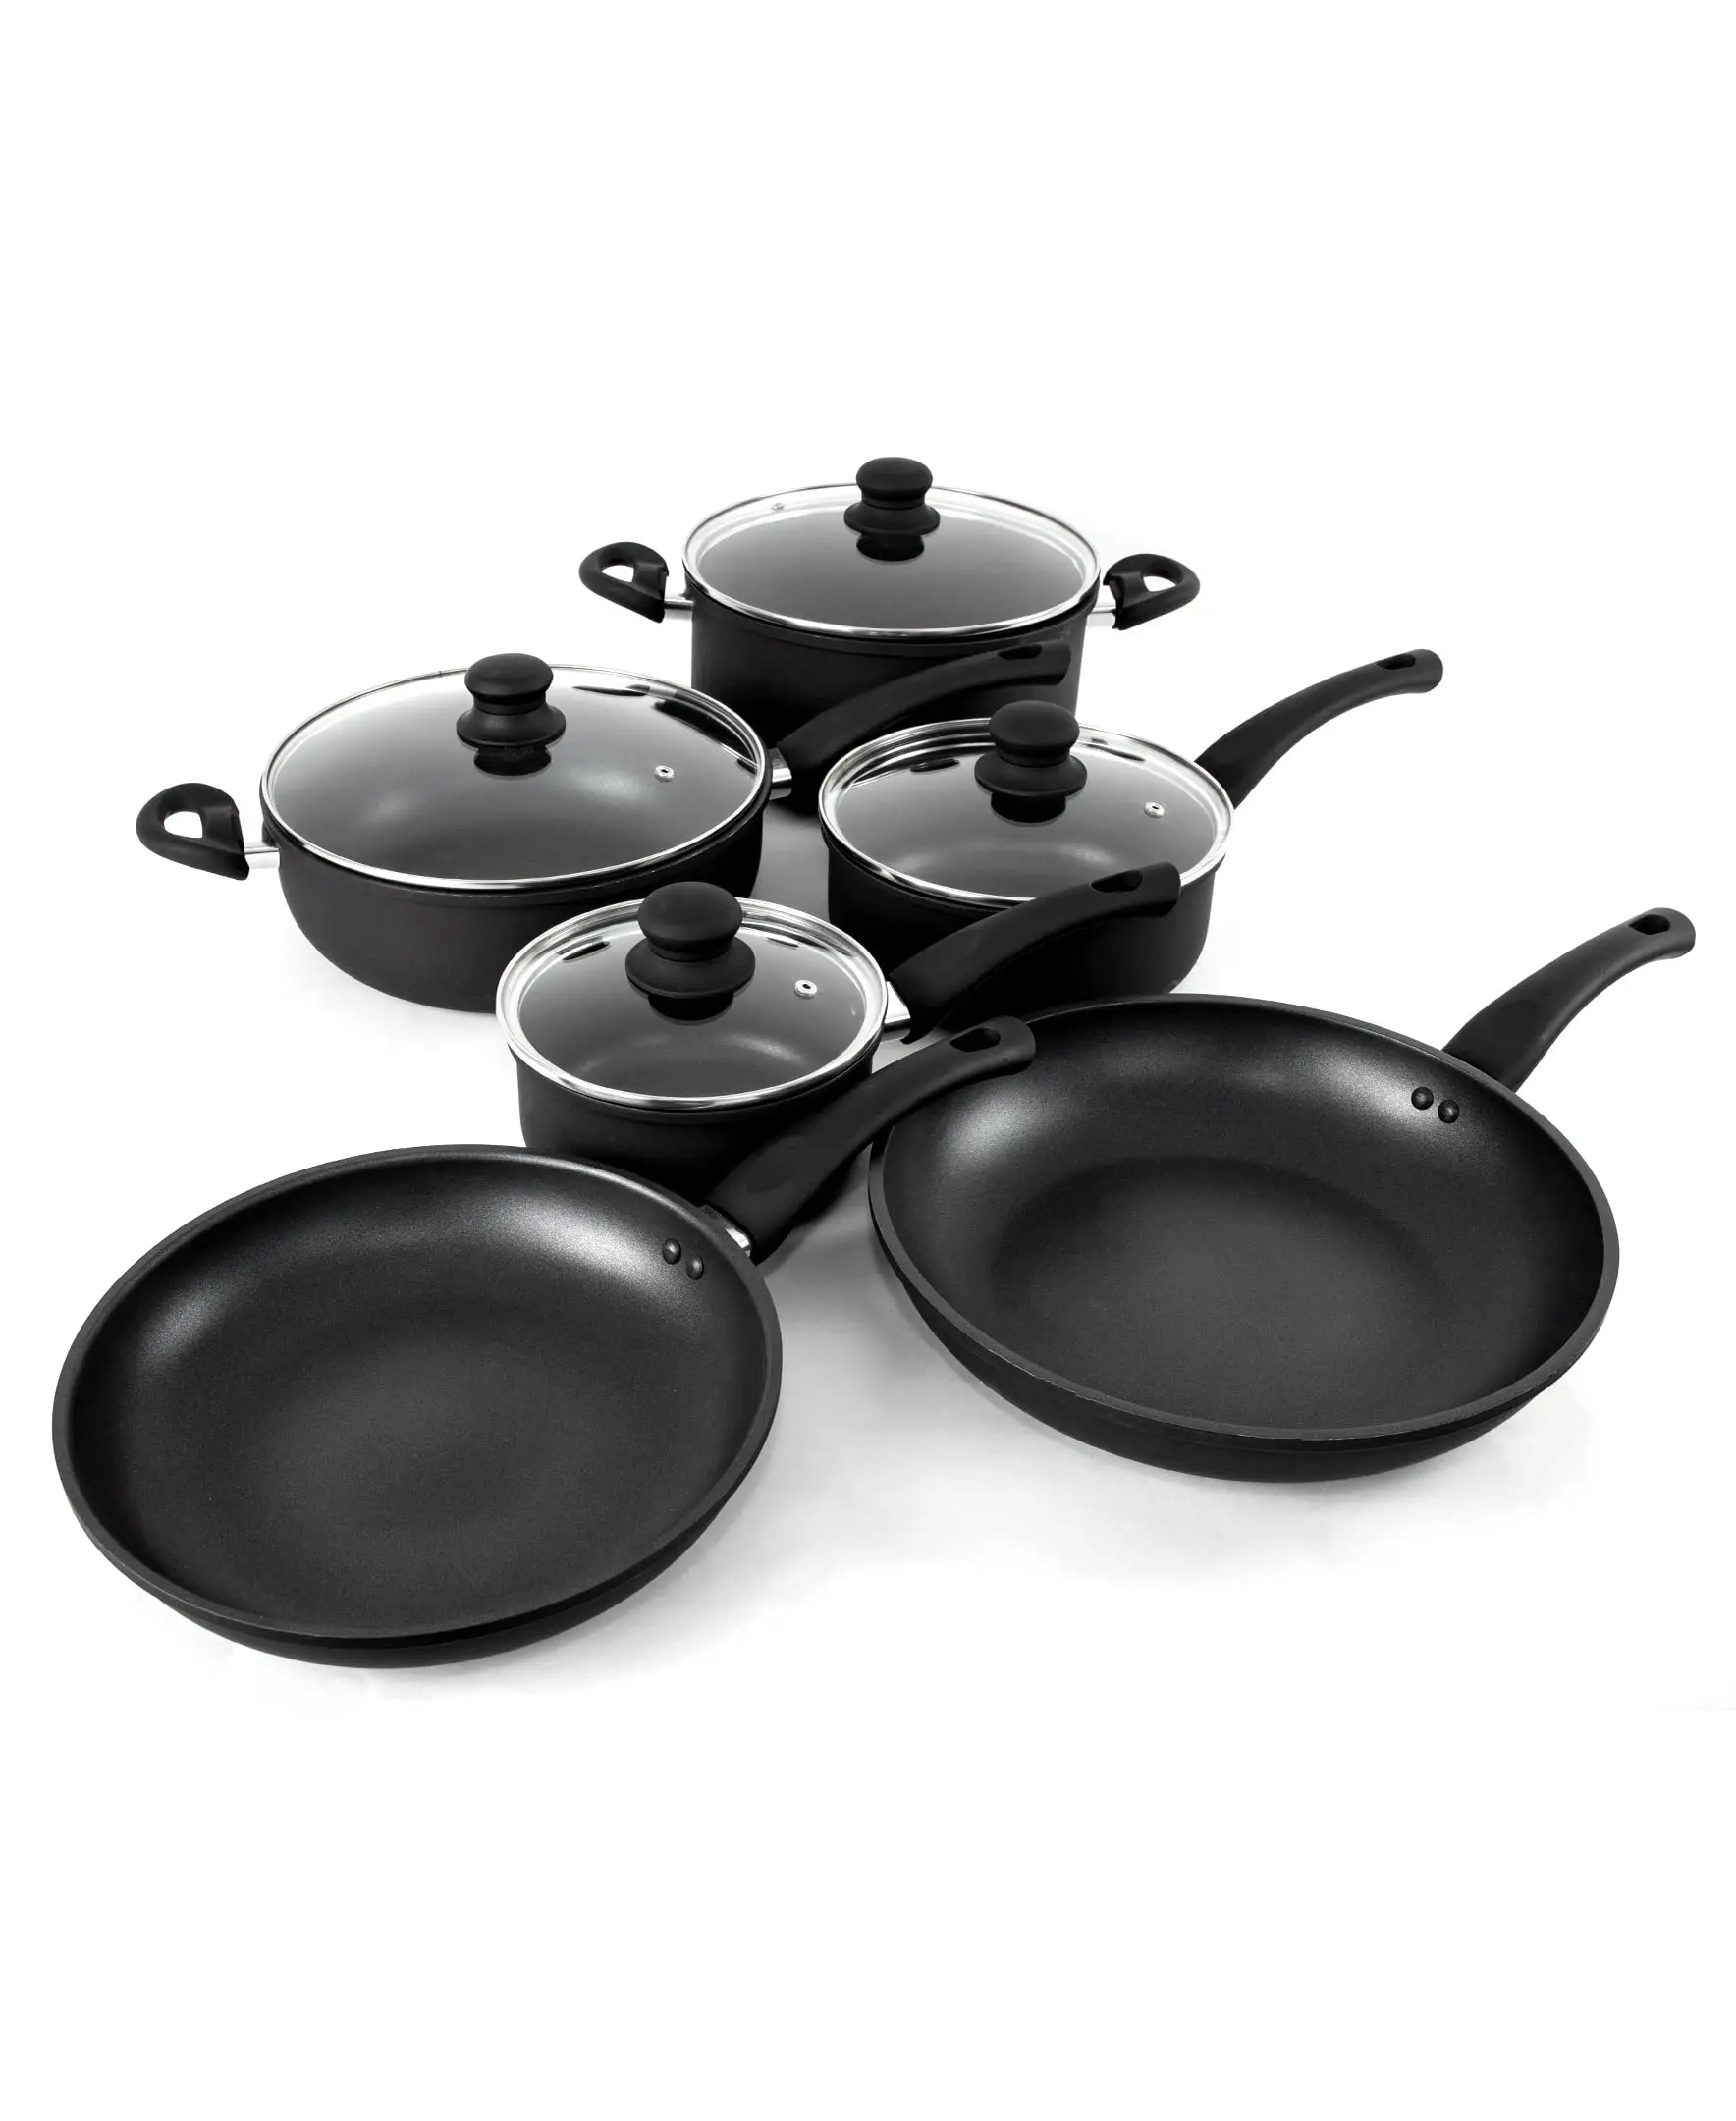 Hell's Kitchen 10 Piece Nonstick Cookware Set Induction Ready Pots and Pans Glass Steam Vent Lids